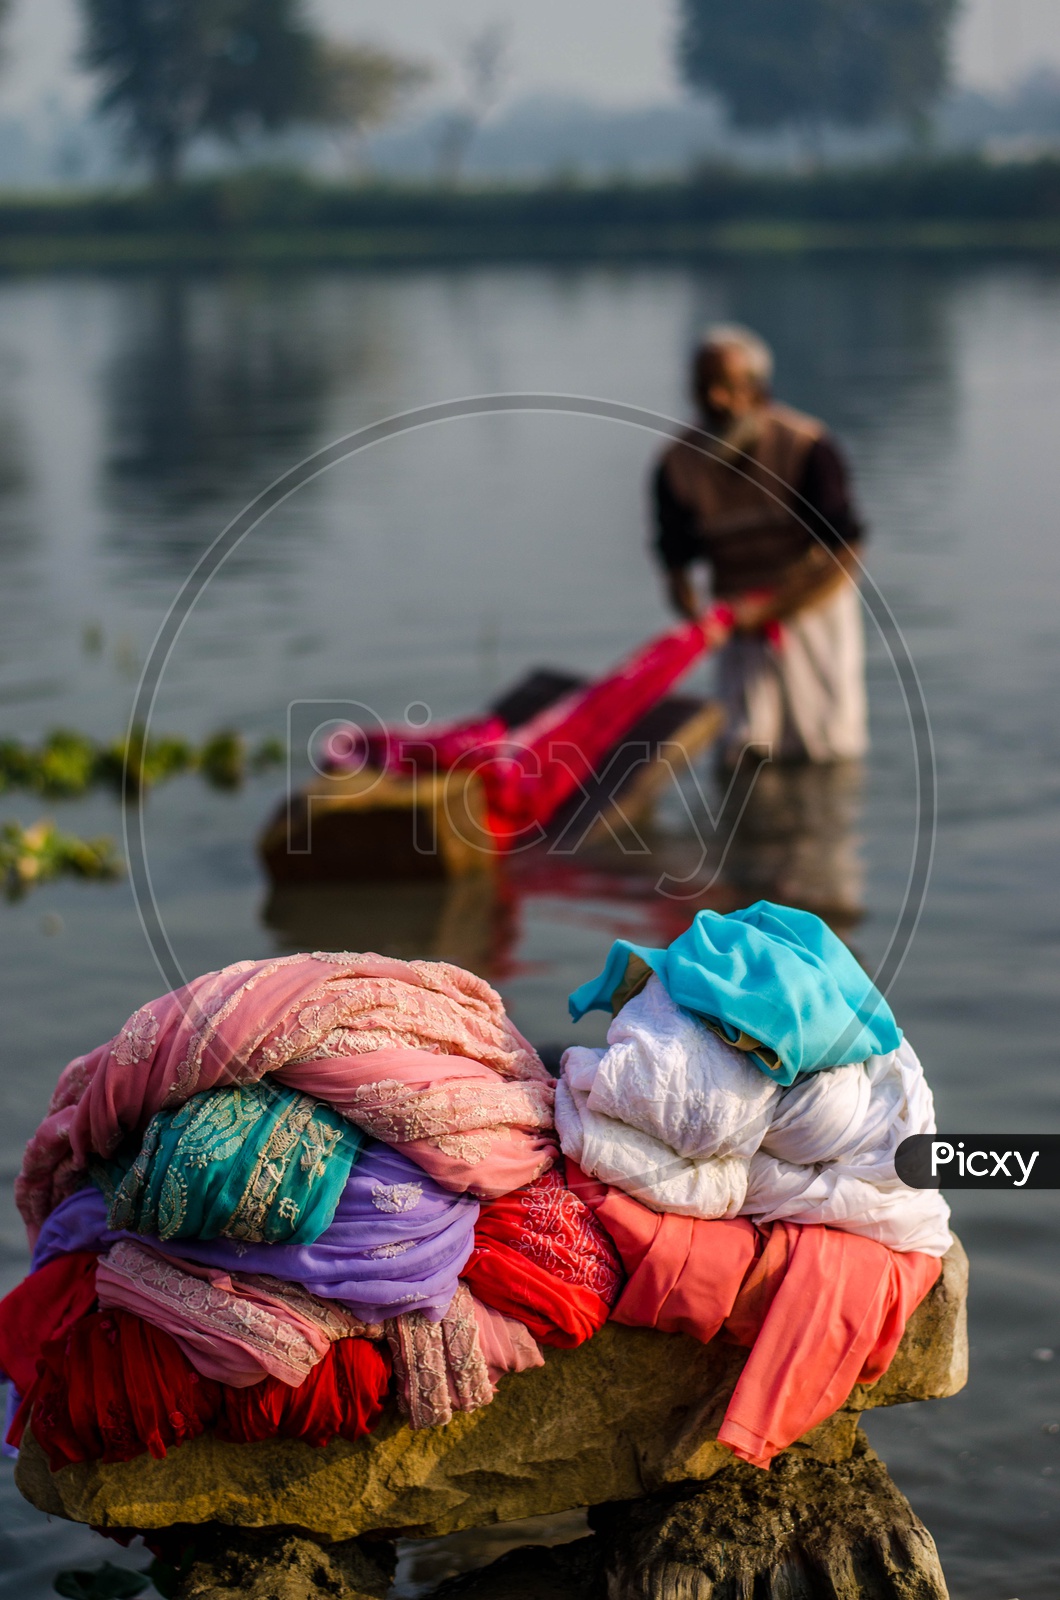 Washed Clothes Pile By a Clothes Washer Or Dhobi  on Bank Of a Lake